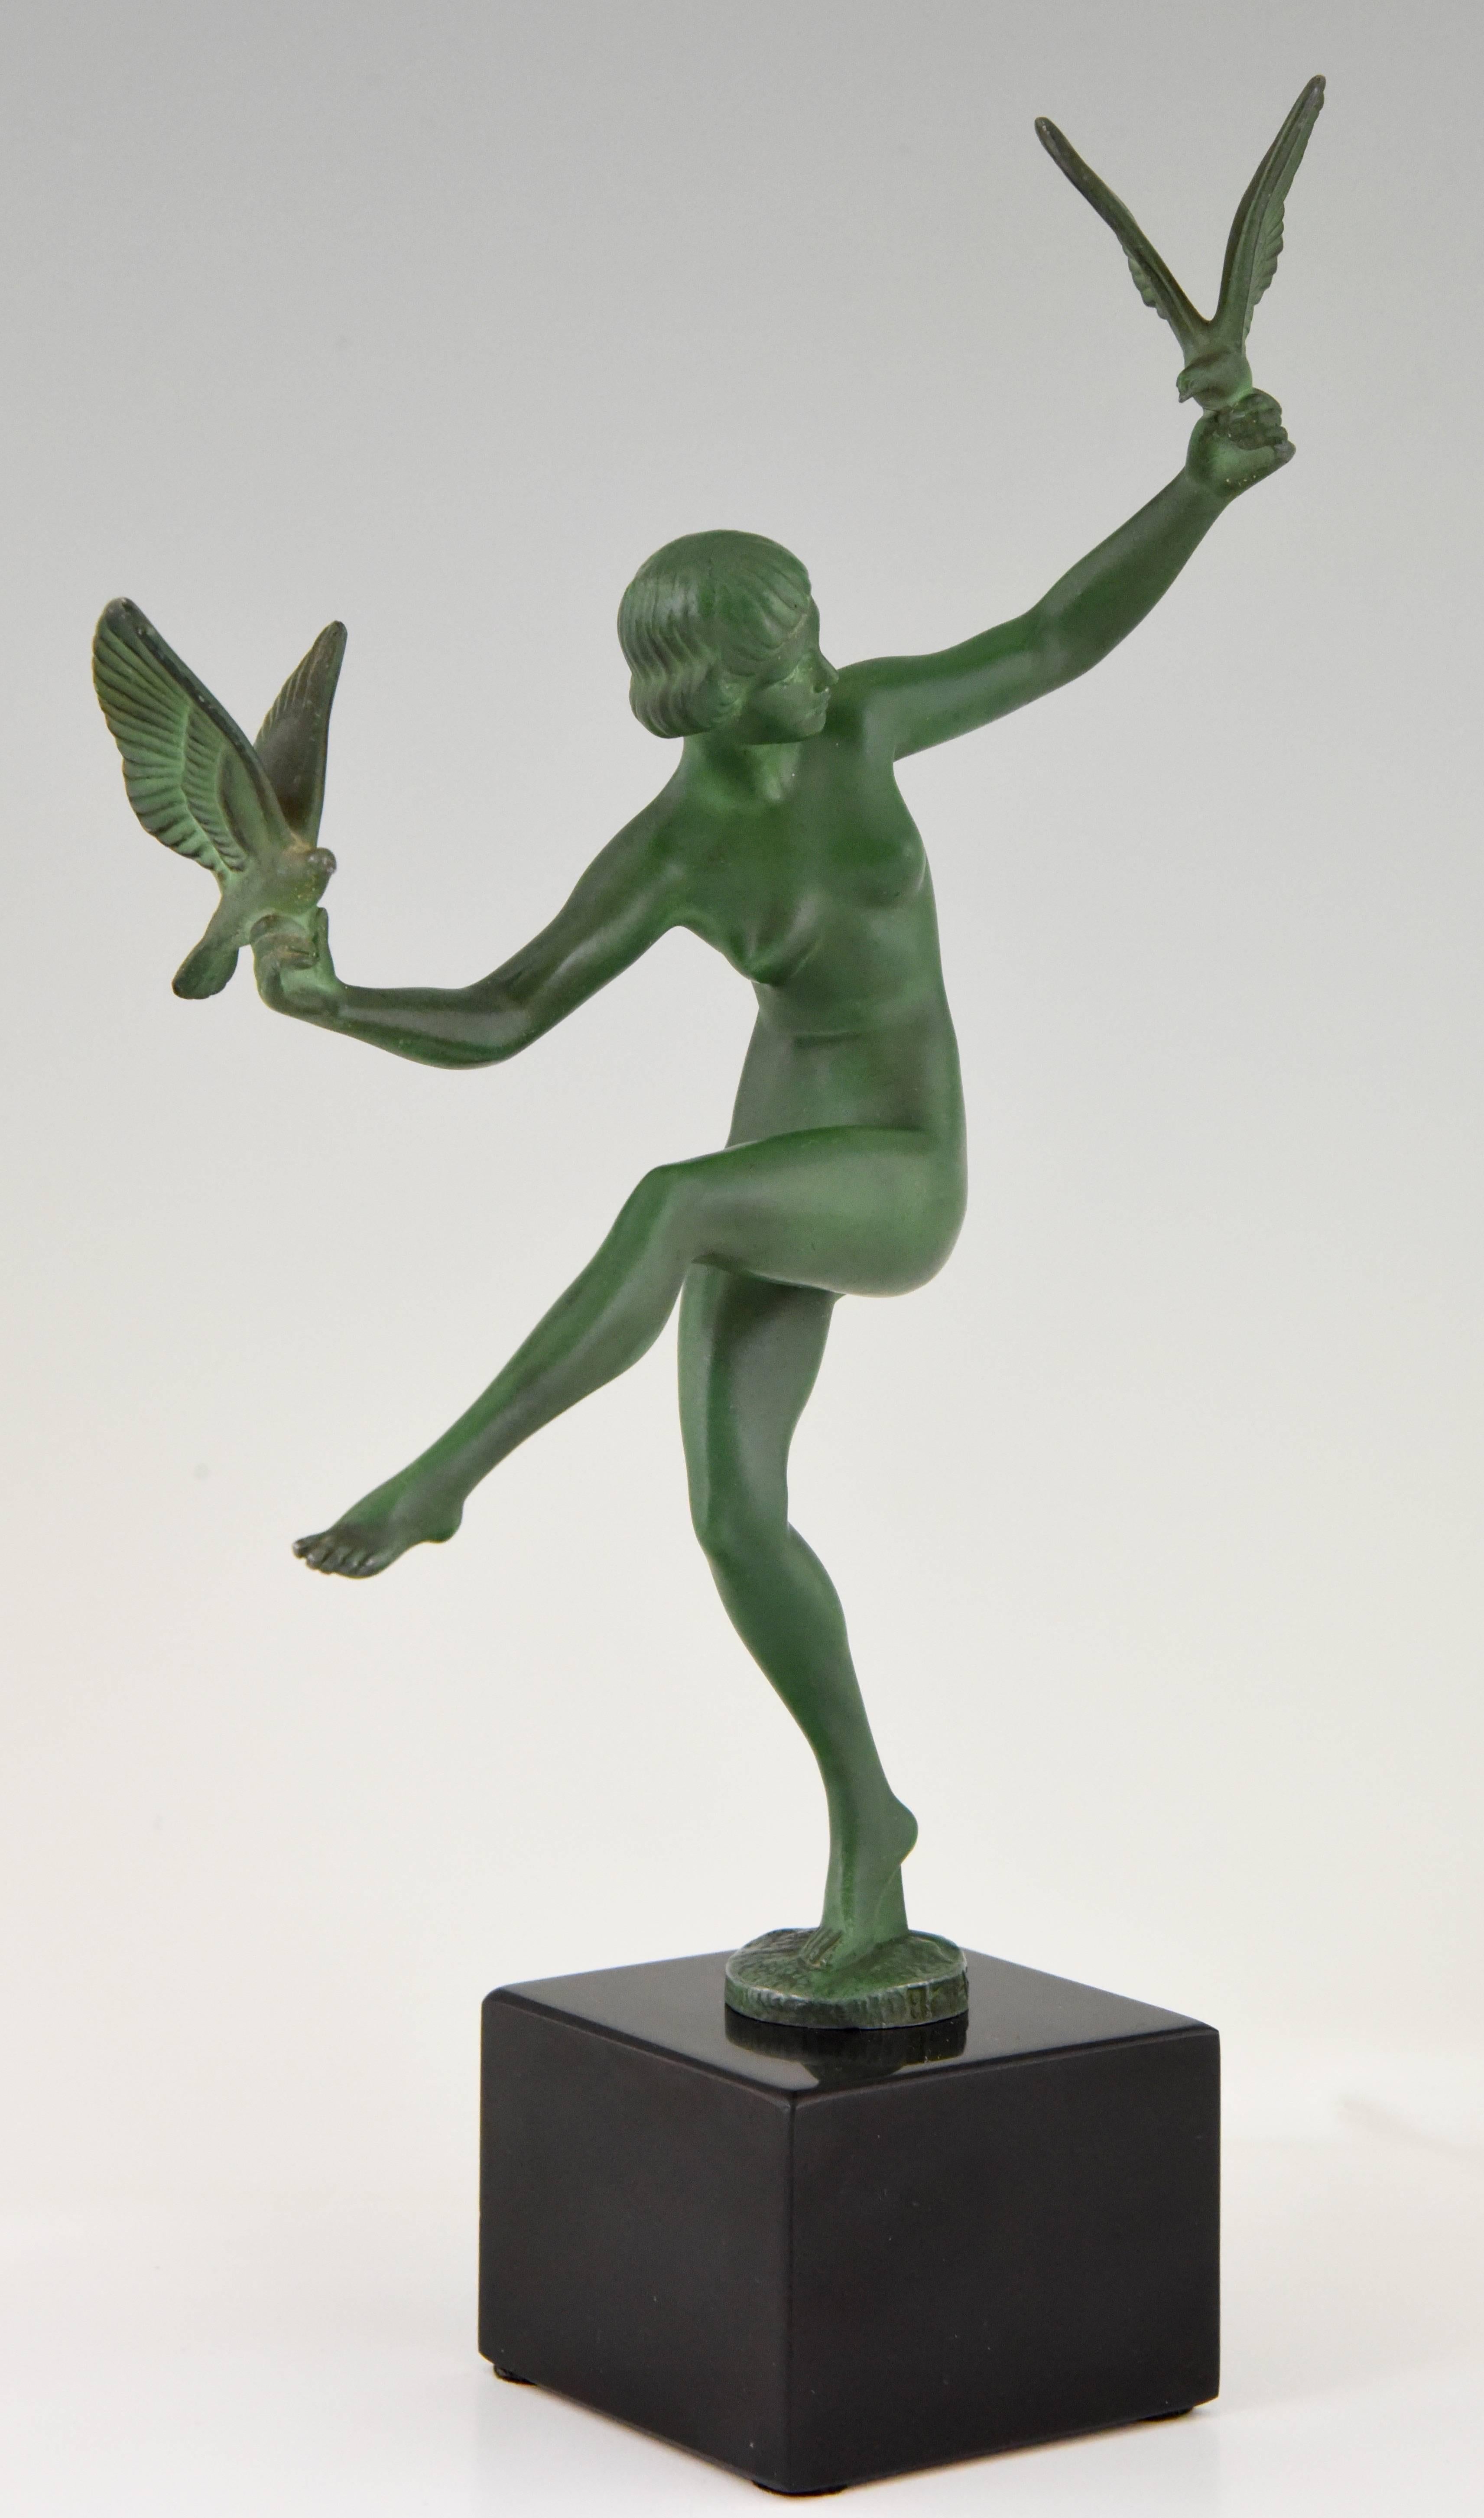 Elegant Art Deco nude bird dancer by Briand.
Pseudonym used by Marcel Bouraine for his art metal sculptures cast by the Max Le Verrier foundry. 

Artist/ maker: Briand, Marcel Bouraine
Signature/ marks: Briand.
Style: Art Deco
Date: